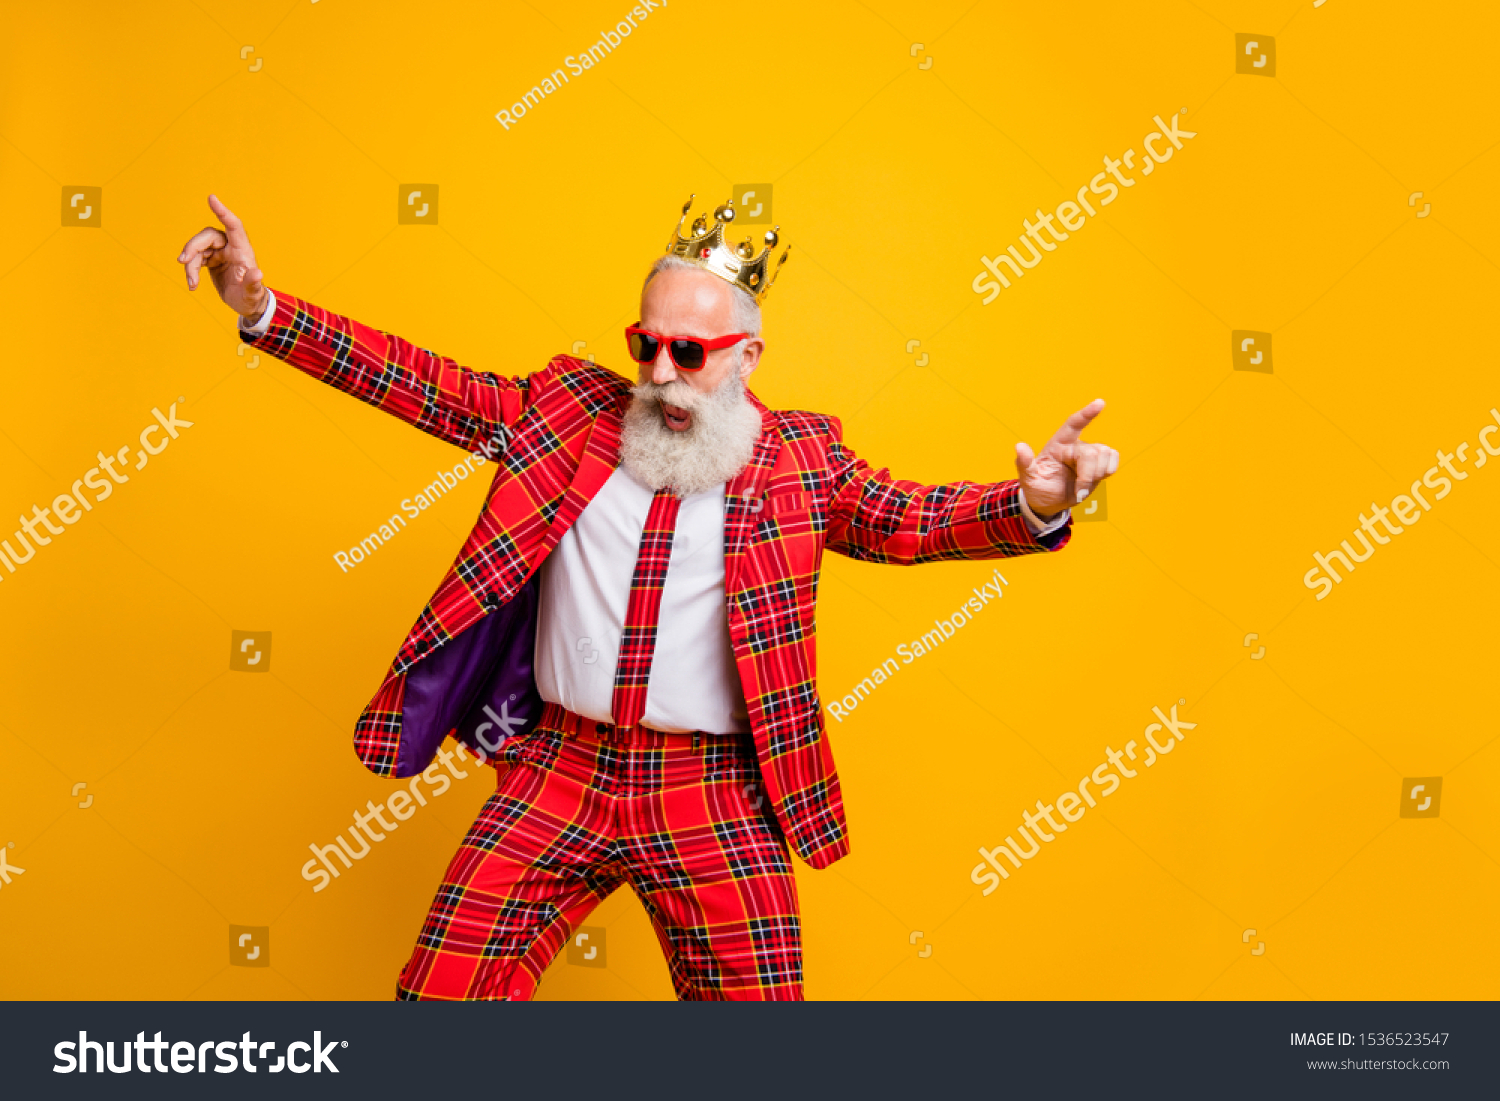 Photo of cool look grandpa white beard vip guy dancing strange youth moves little drunk wear crown sun specs plaid red blazer tie pants outfit isolated yellow color background #1536523547